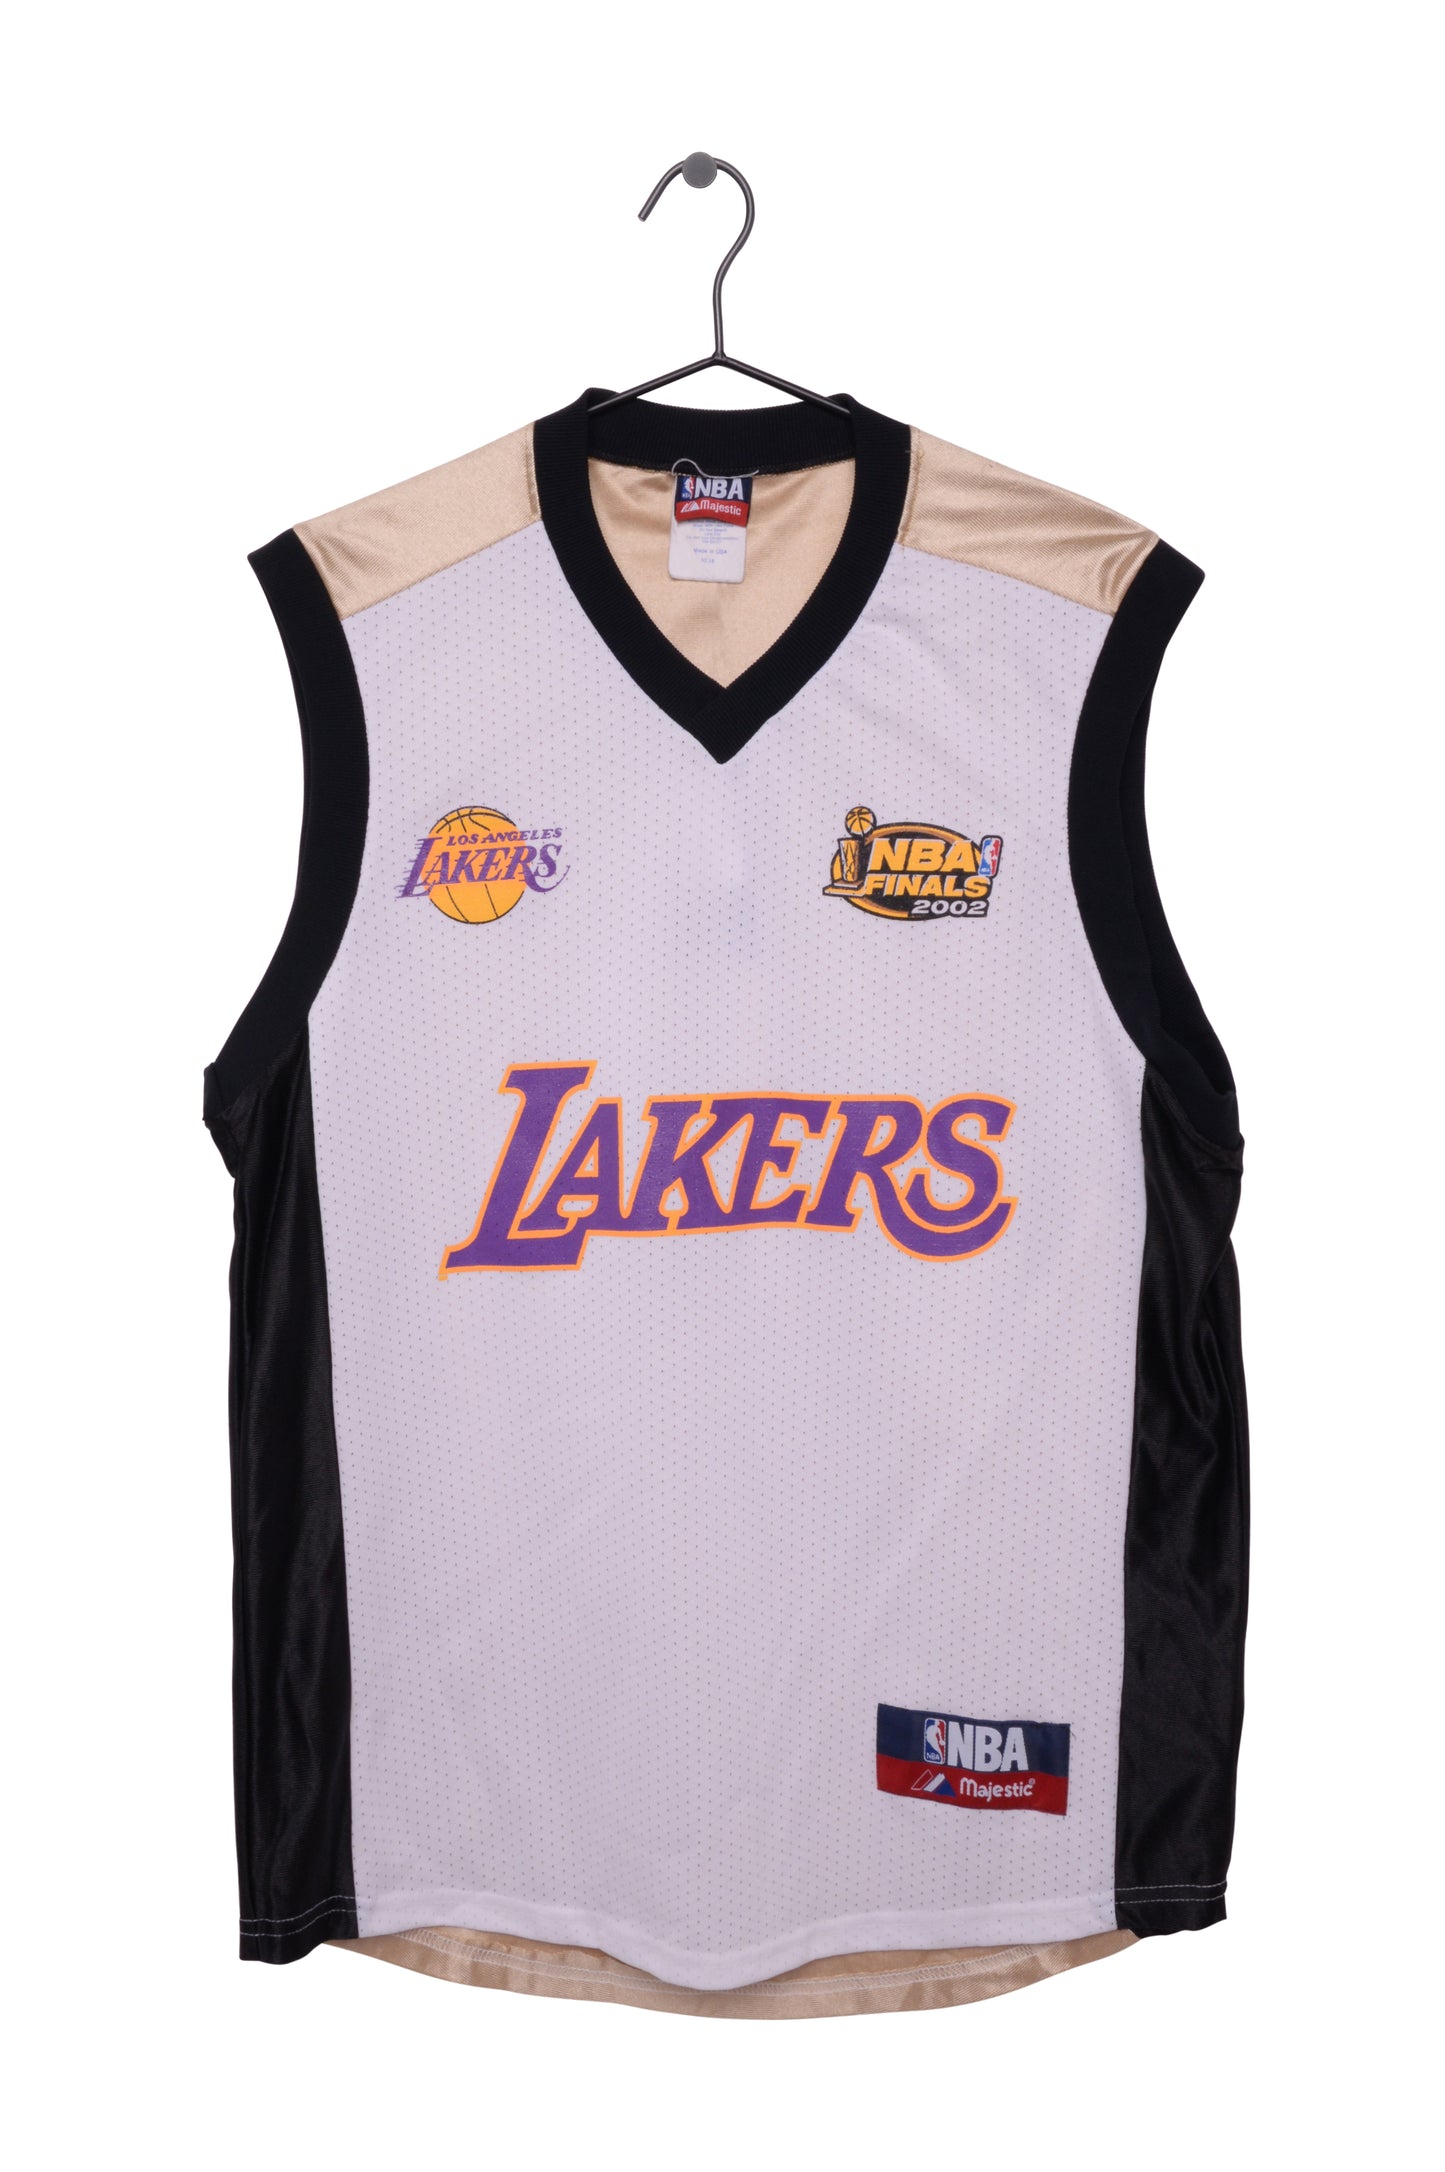 2002 Lakers O'Neal Jersey